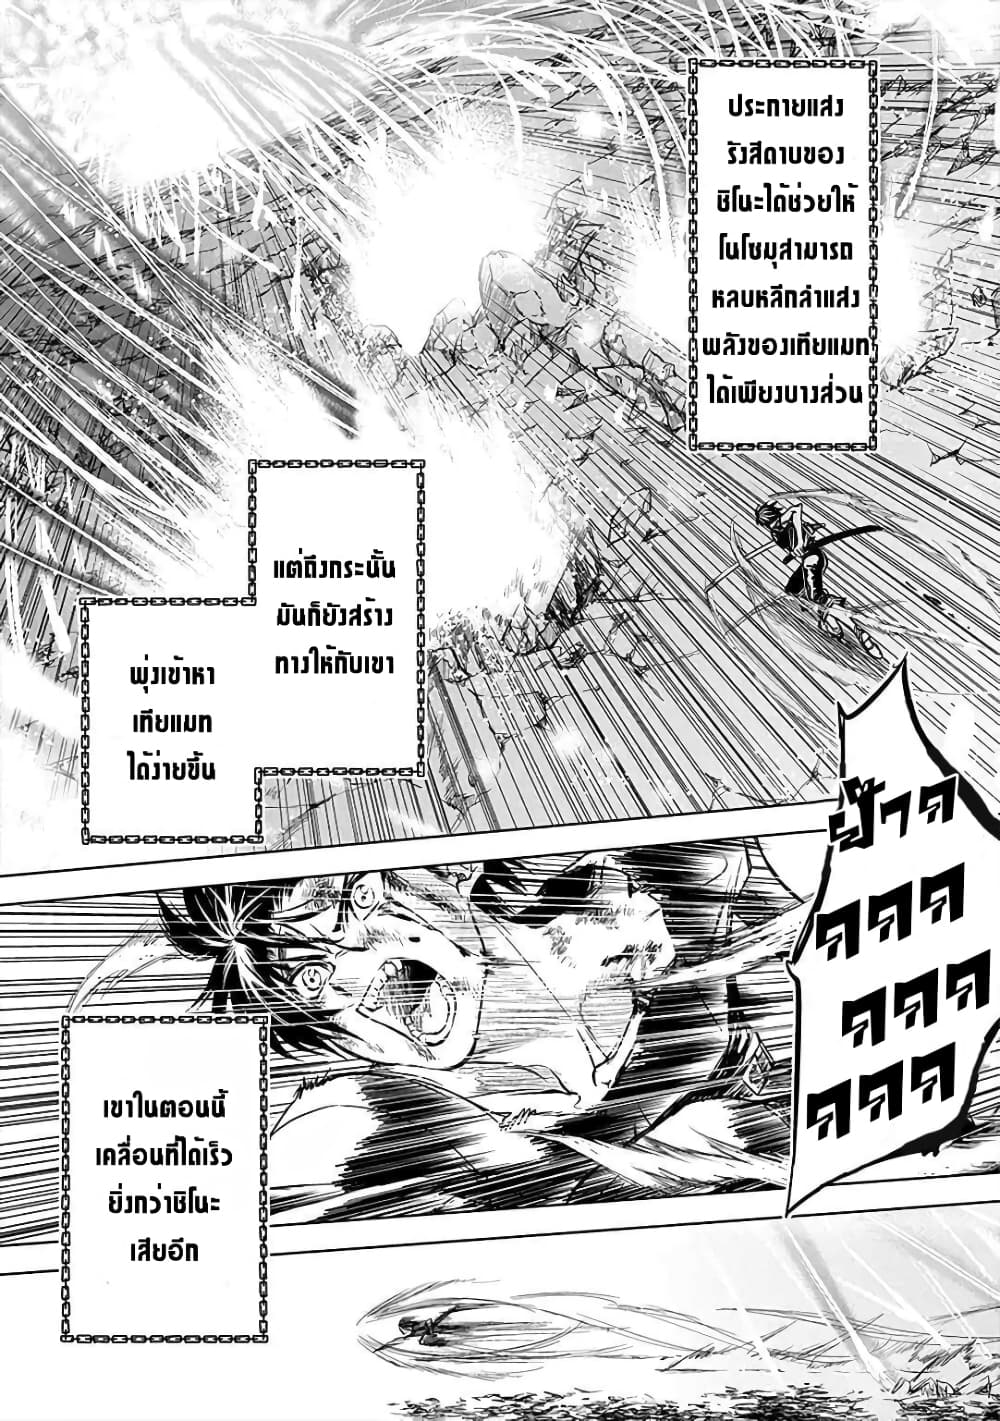 Ori of the Dragon Chain Heart in the Mind 8 (10)